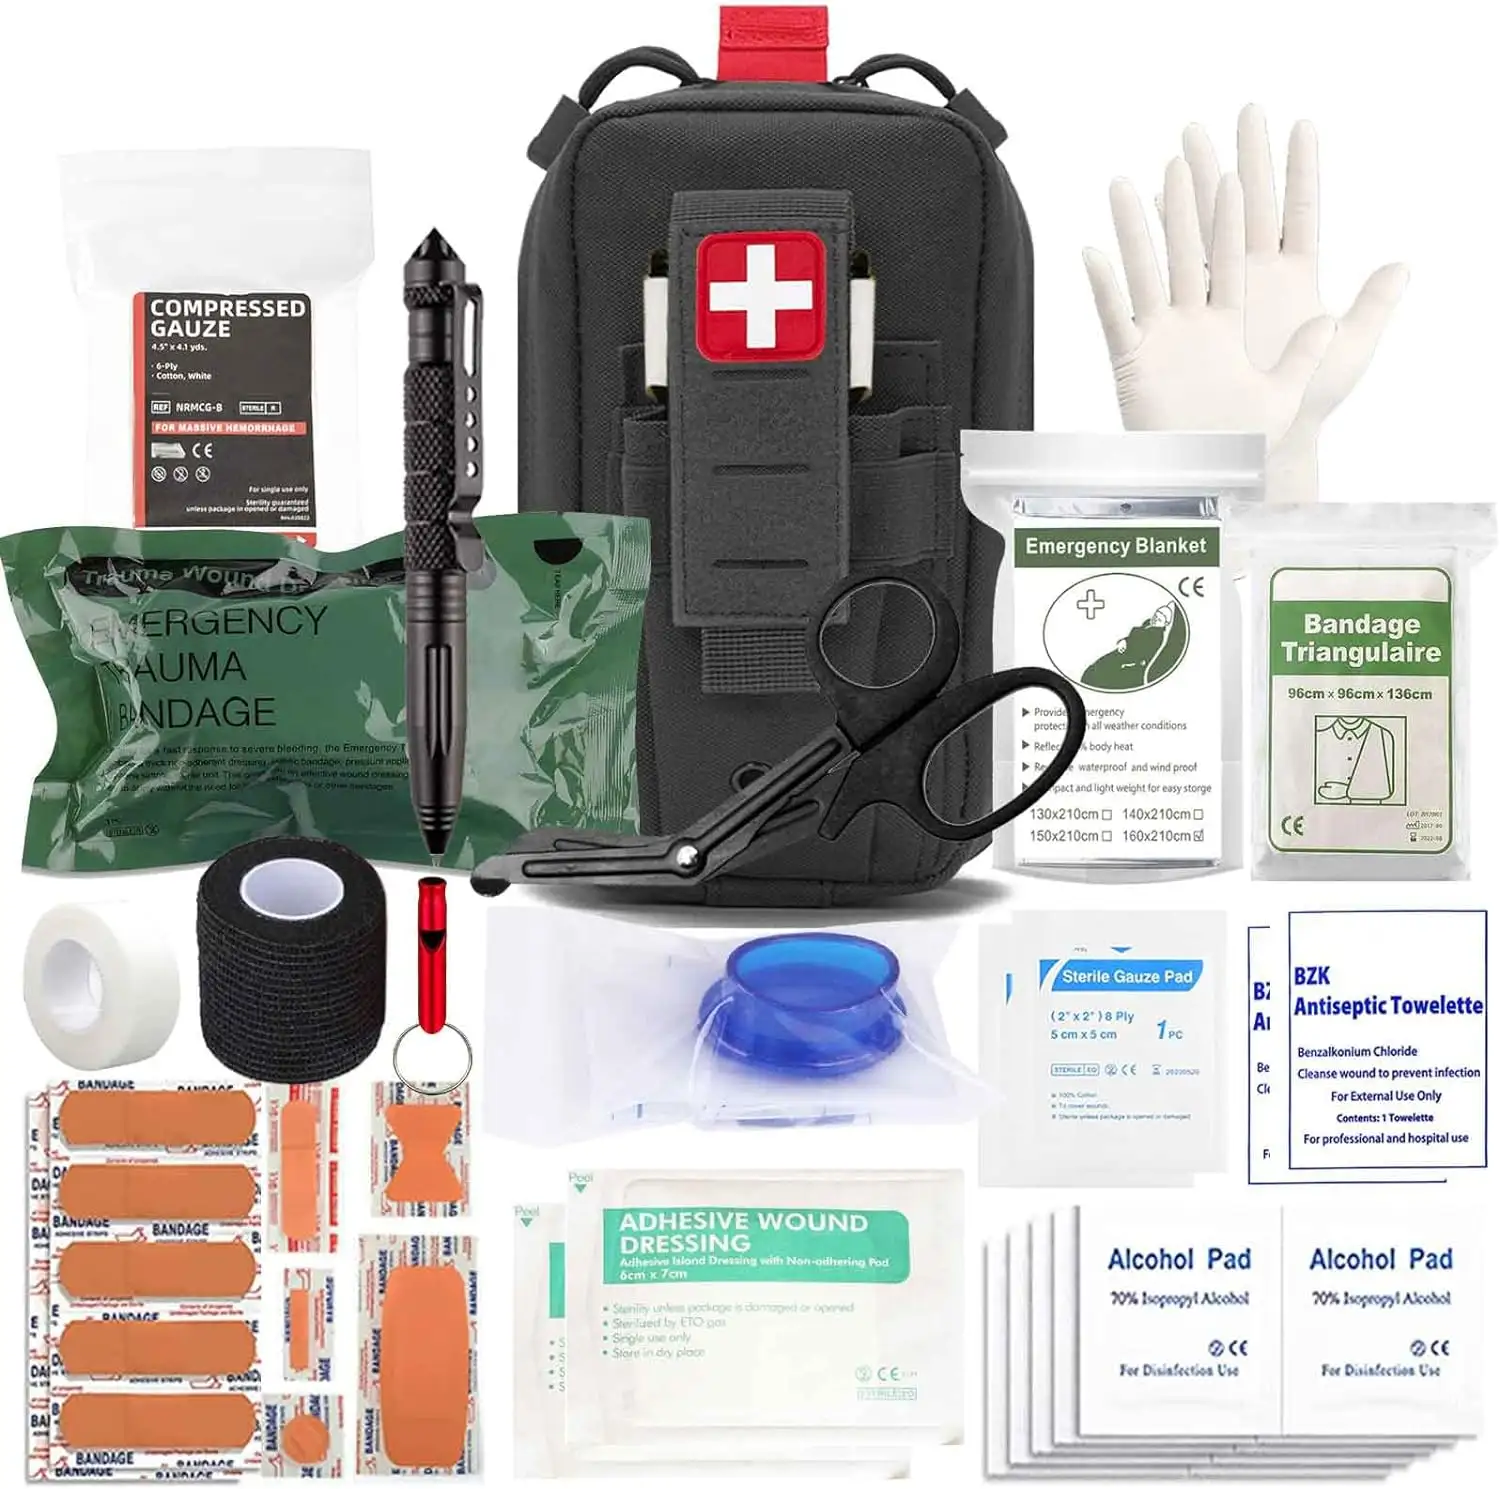 Tactical Molle Ifak Trauma Kit Refil Medical Emergency Survival First Aid Kits Rip Away EMT Medic Kit for Military